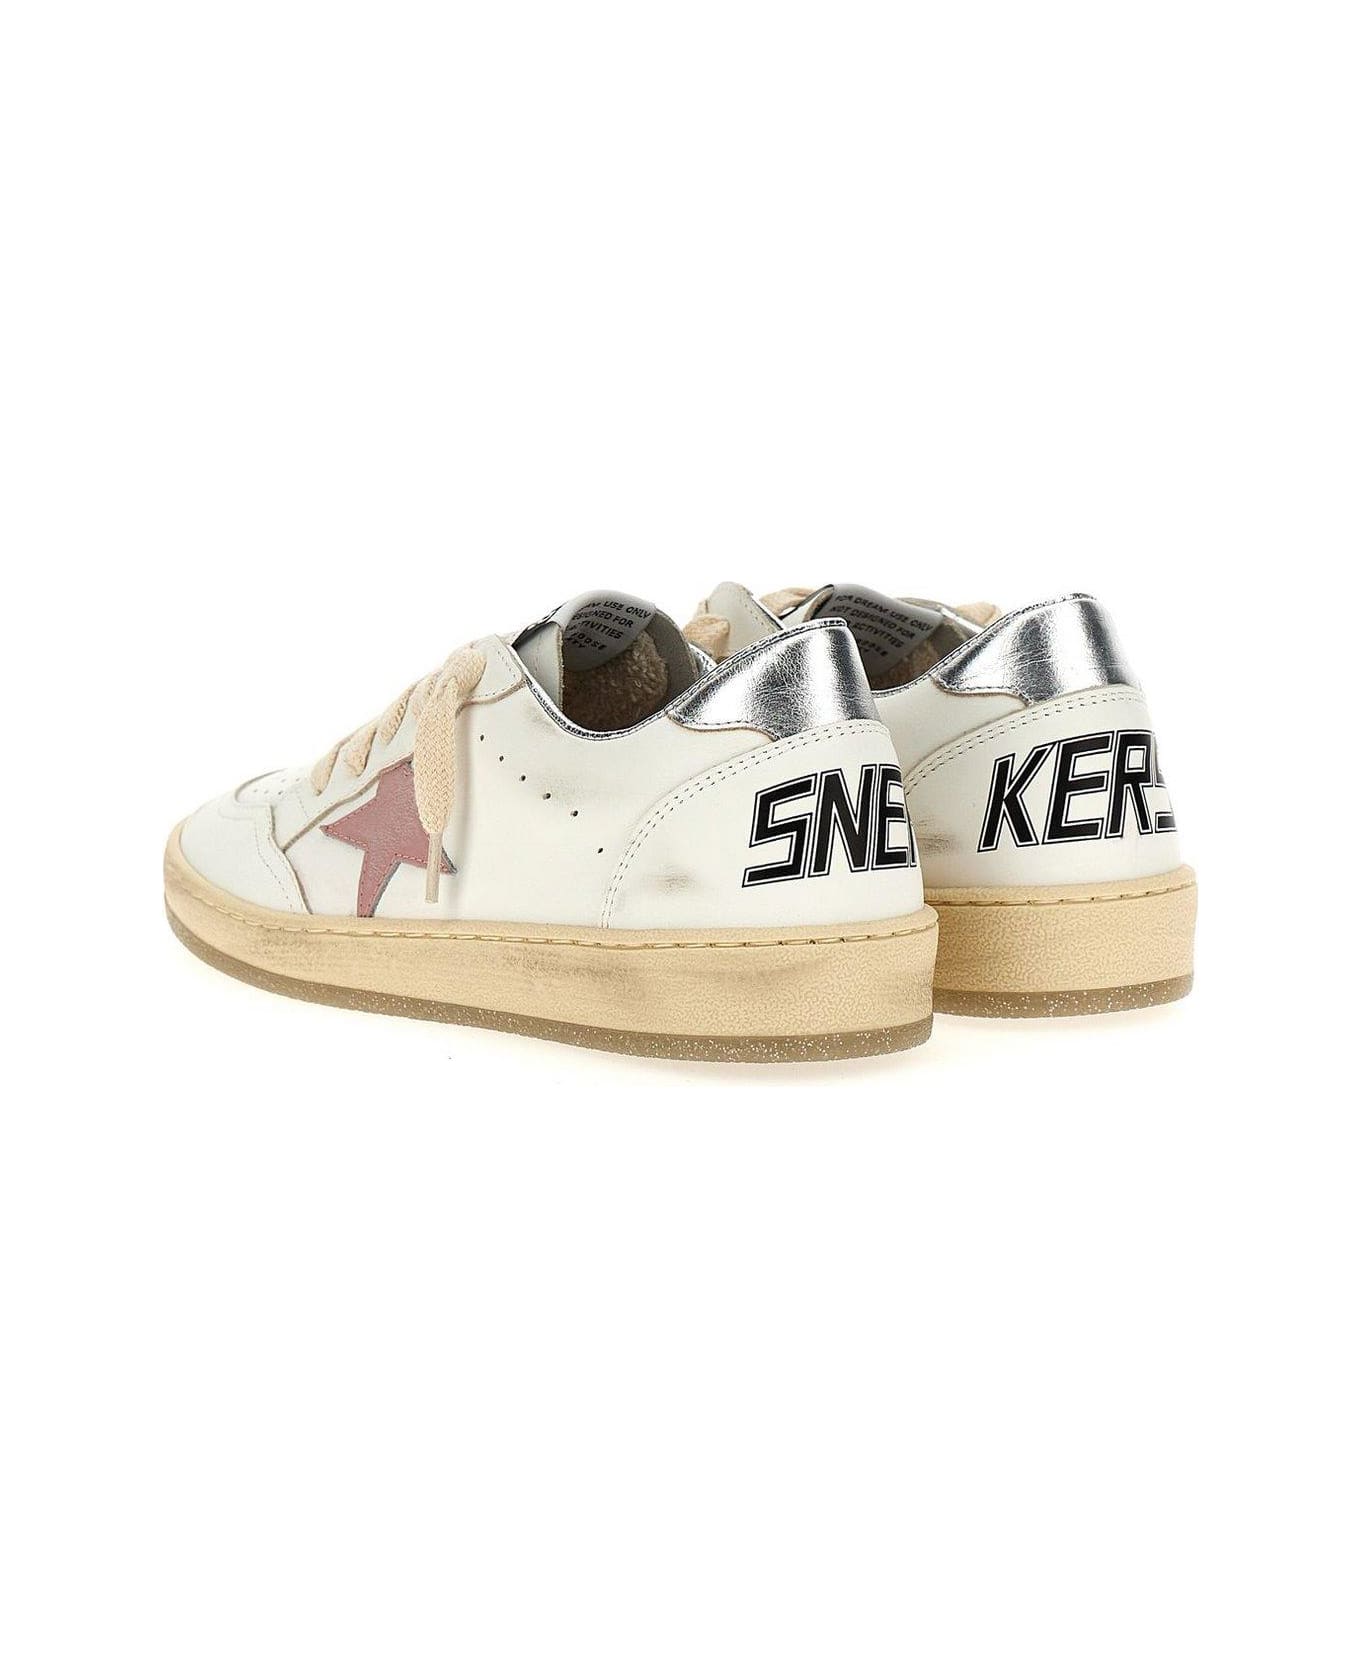 Golden Goose Kids Ball Star-patch Lace-up Sneakers - White/pink/light Blue シューズ